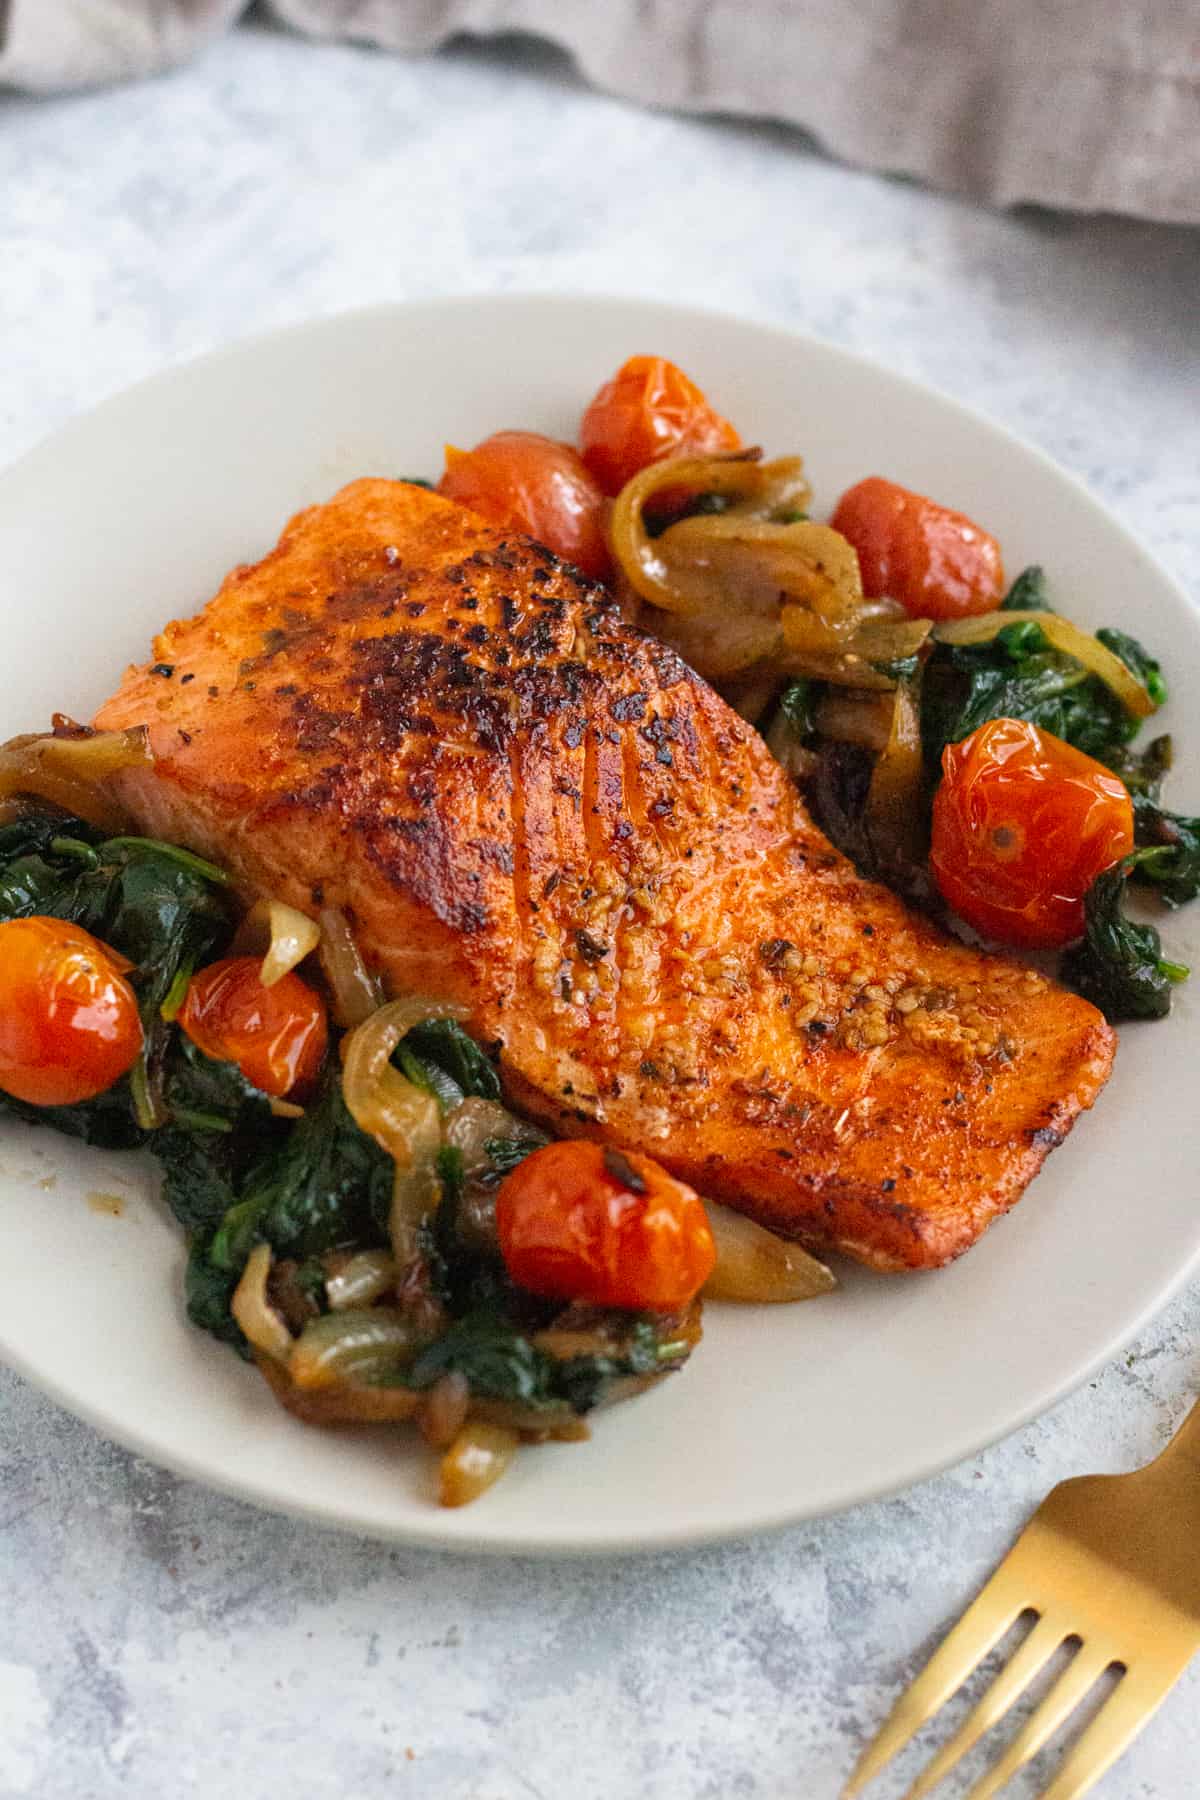 Everything you need to know about pan seared salmon. From what salmon to get to a fool proof how-to. Watch the step-by-step video tutorial to learn how to make the best pan seared salmon that's crispy on the outside and juicy on the inside. 